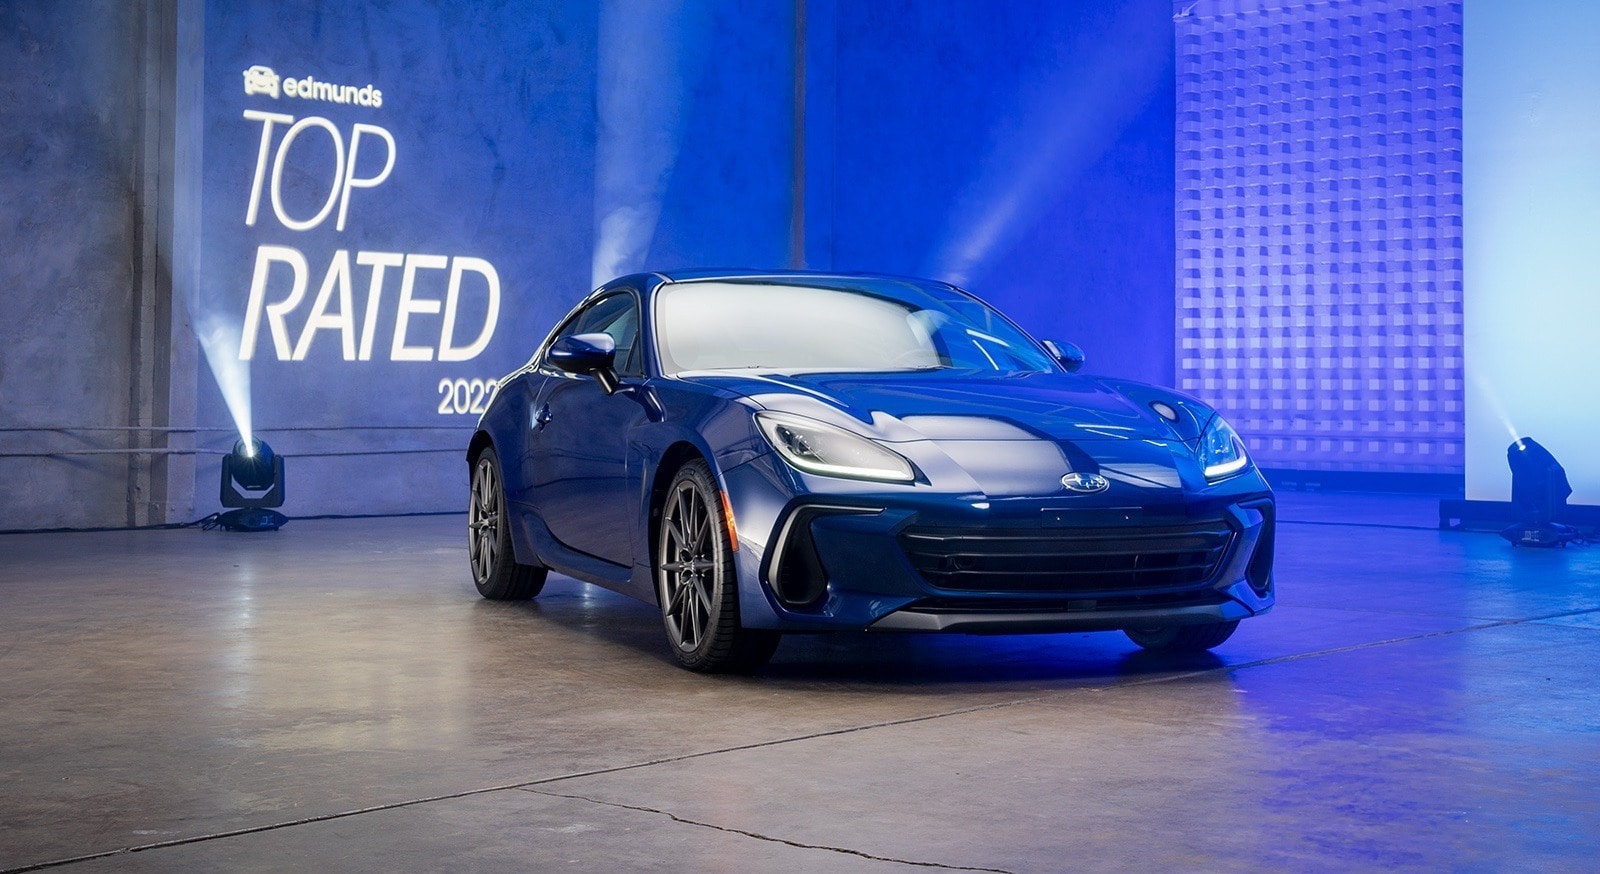 Edmunds Top Rated Sports Car 2022